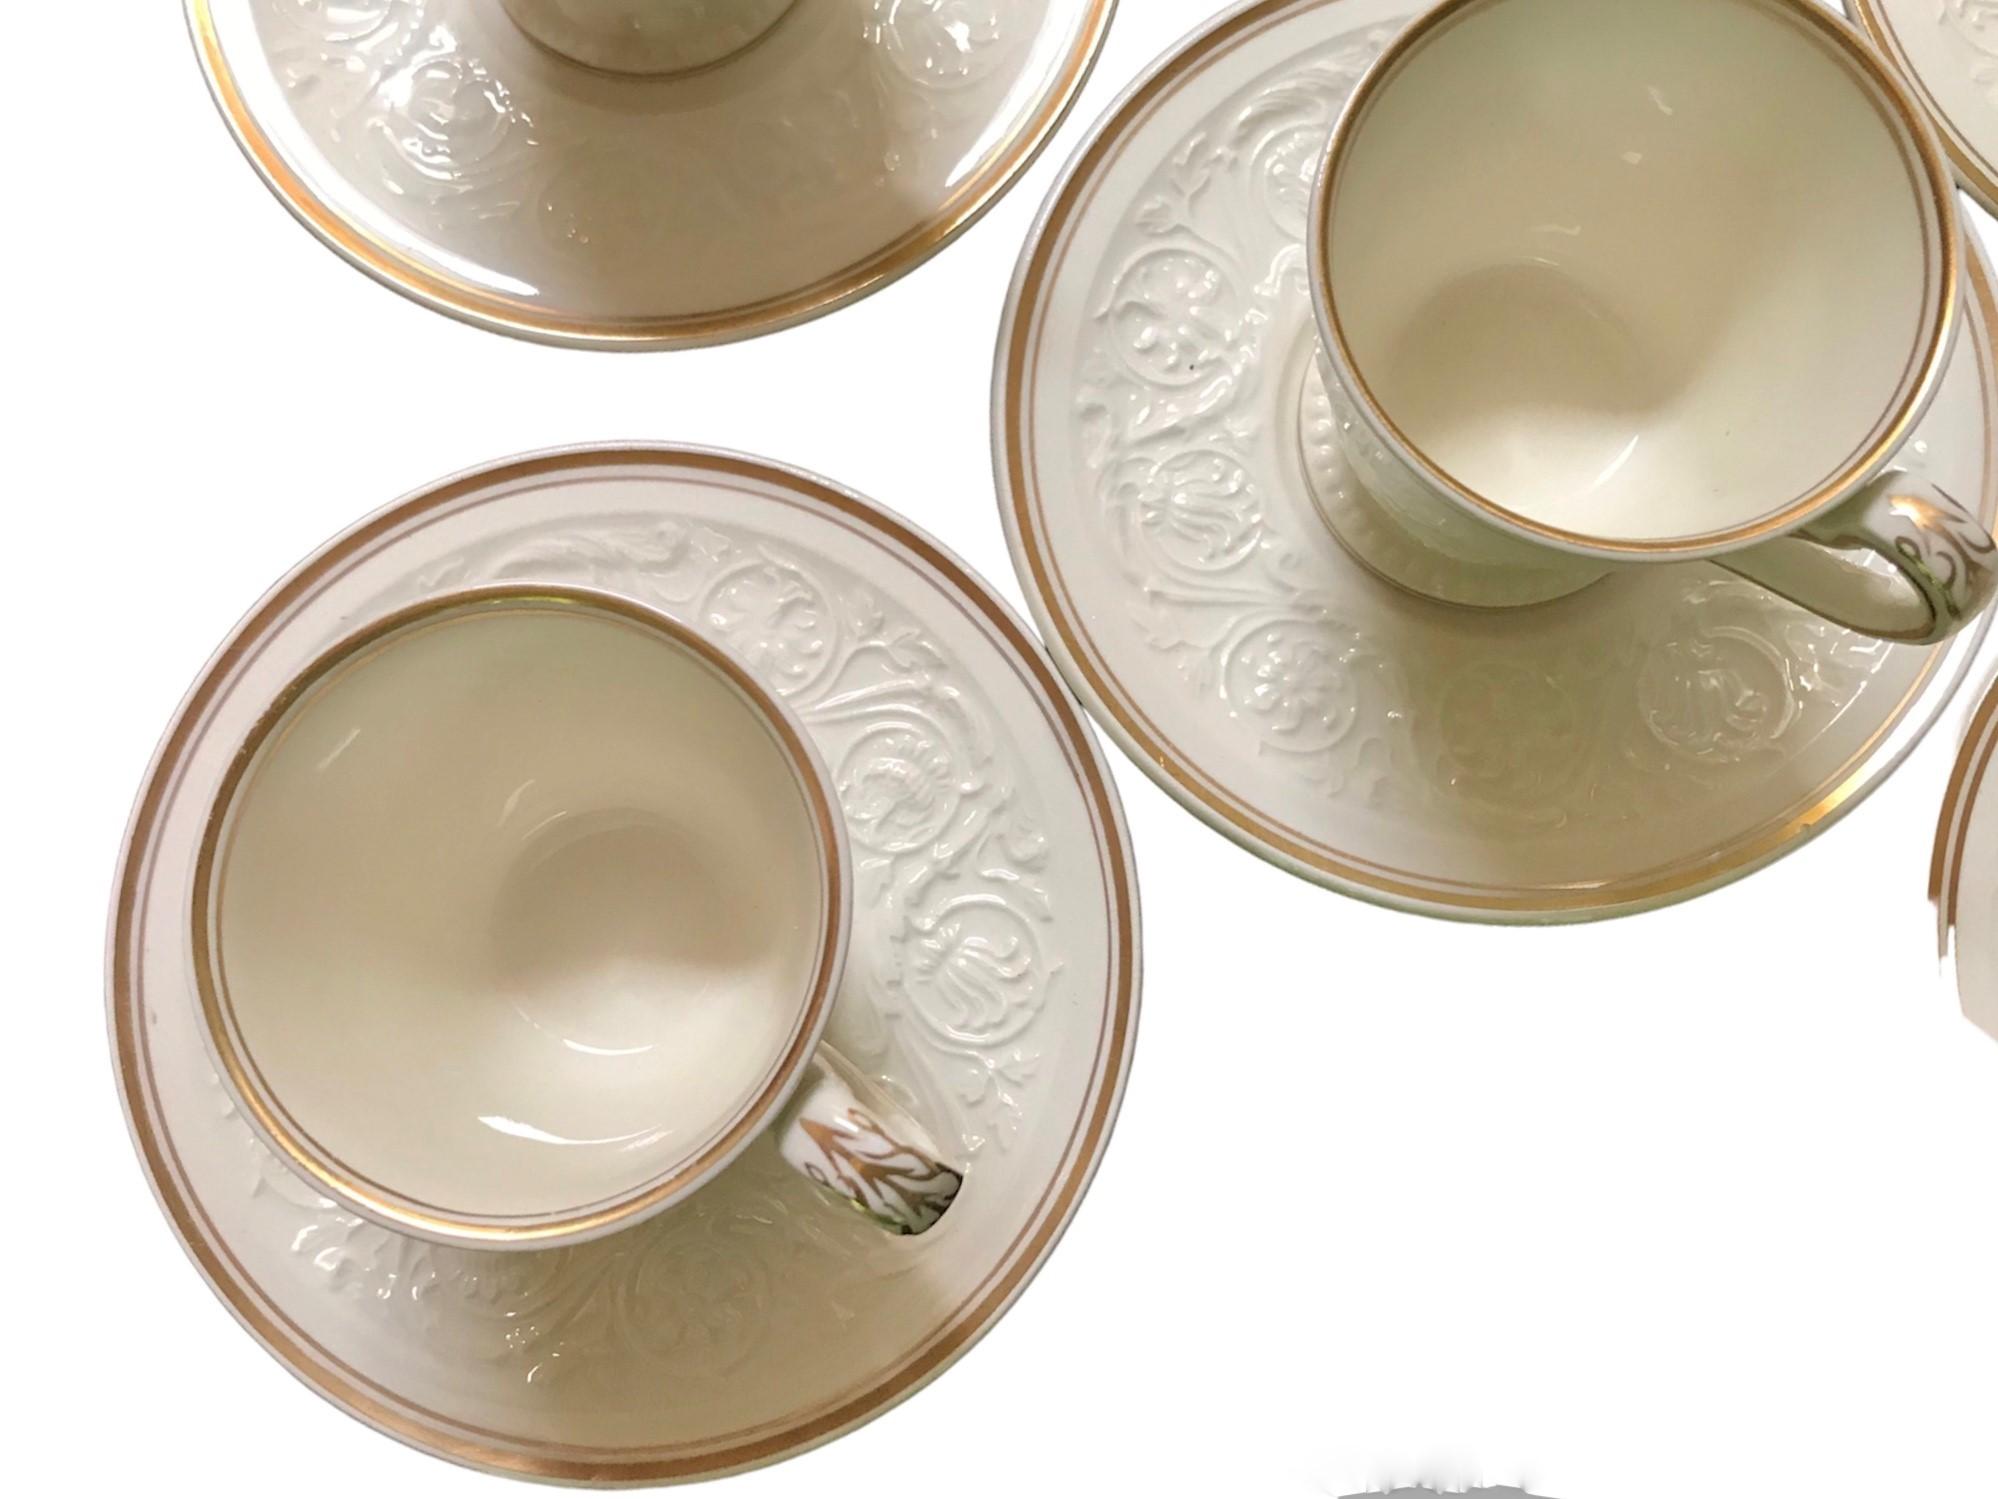 A set of Eight Wedgewood Patrician Gilt Pattern Demi-tasse Cups and Saucers. A very popular design from 1927 – 1986 for Wedgwood of Eutria & Barlaston, the Patrician Pattern of fine bone china dinnerware was produced in a mold of embossed flowers